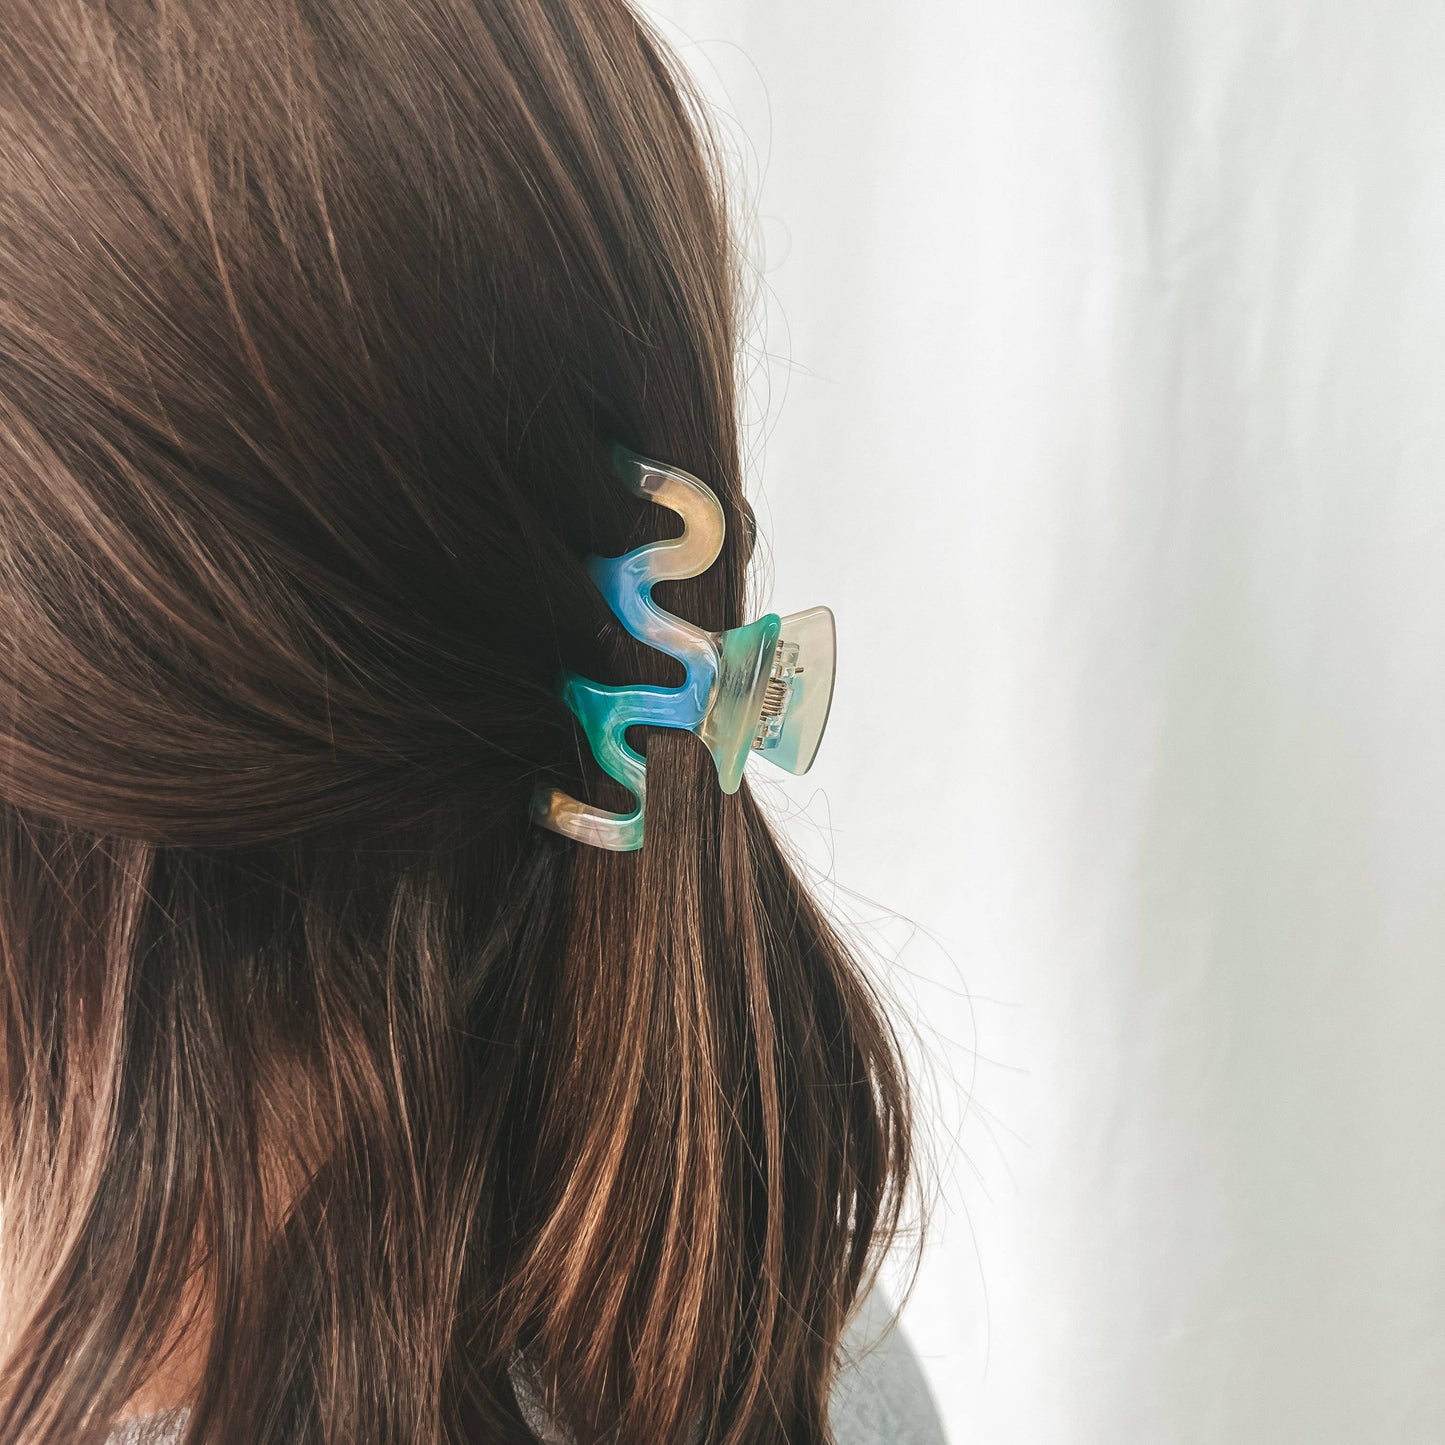 The Funky - Mini Hair Accessories Horace Jewelry   